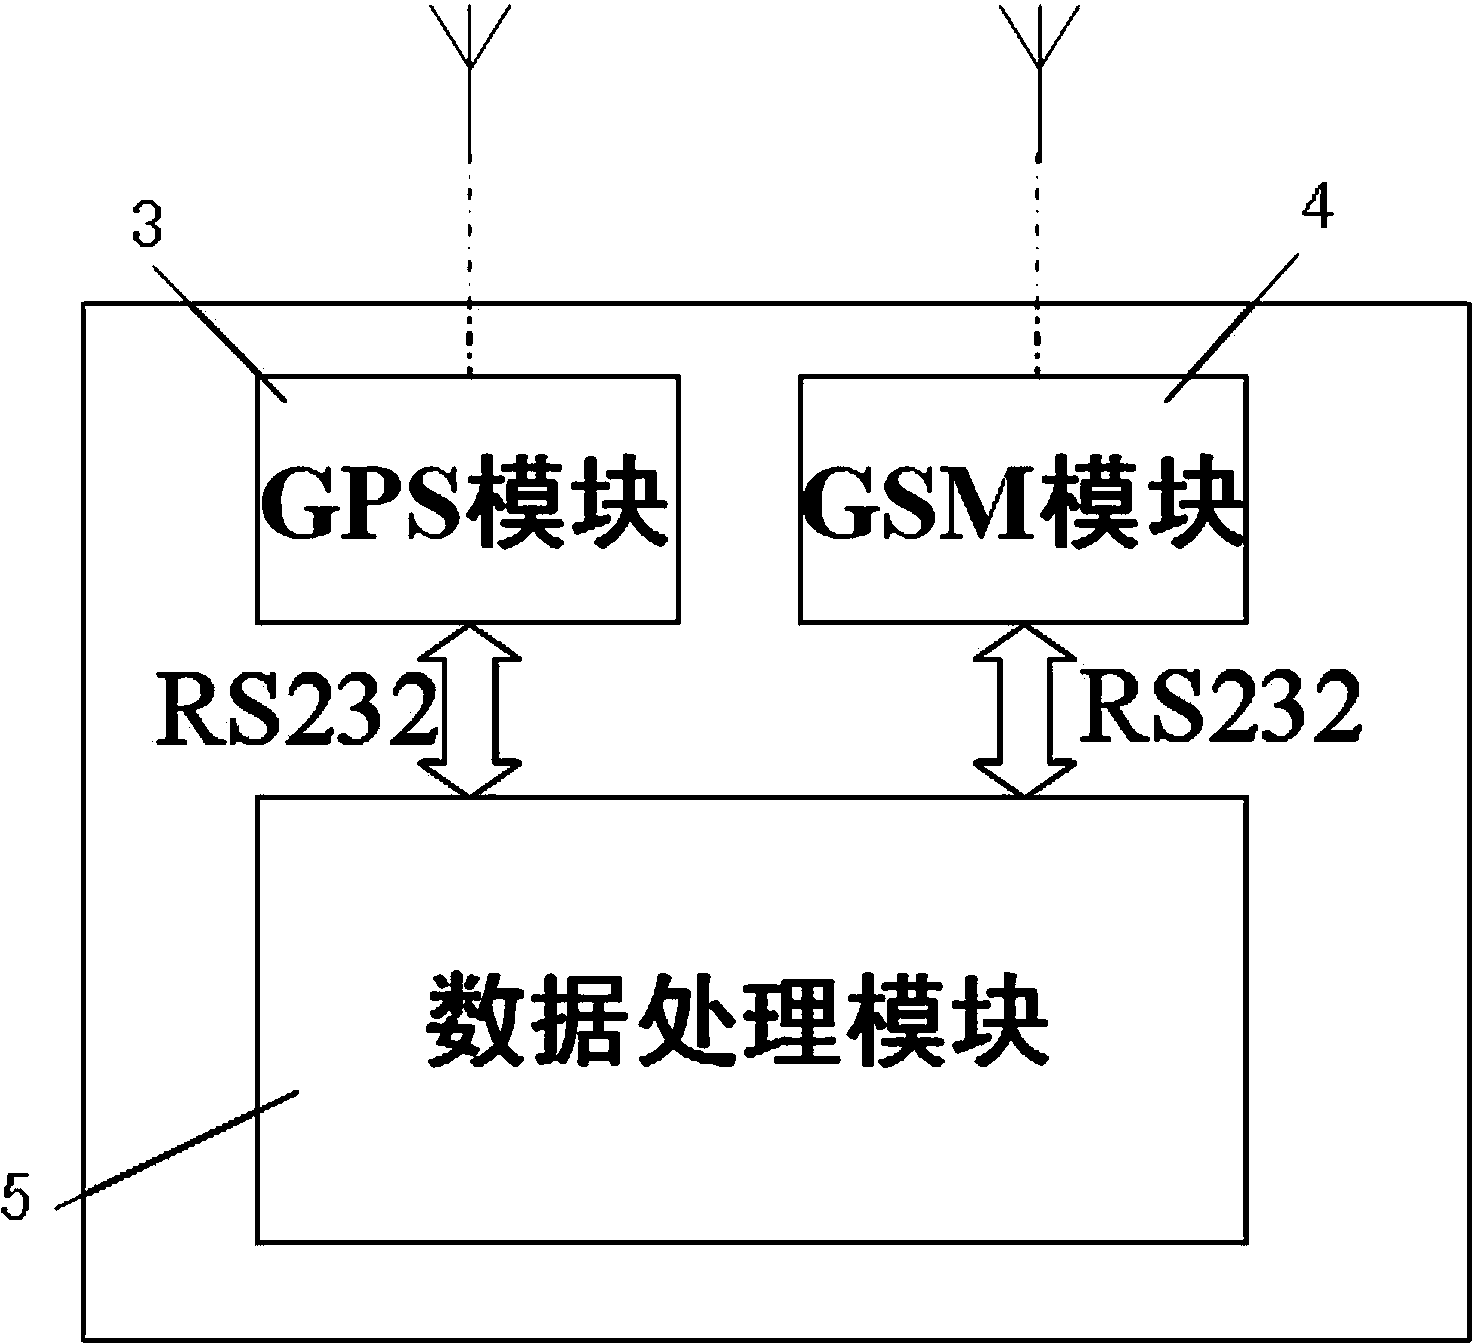 GPS (Global Positioning System) vehicle monitoring management system for concrete vehicle